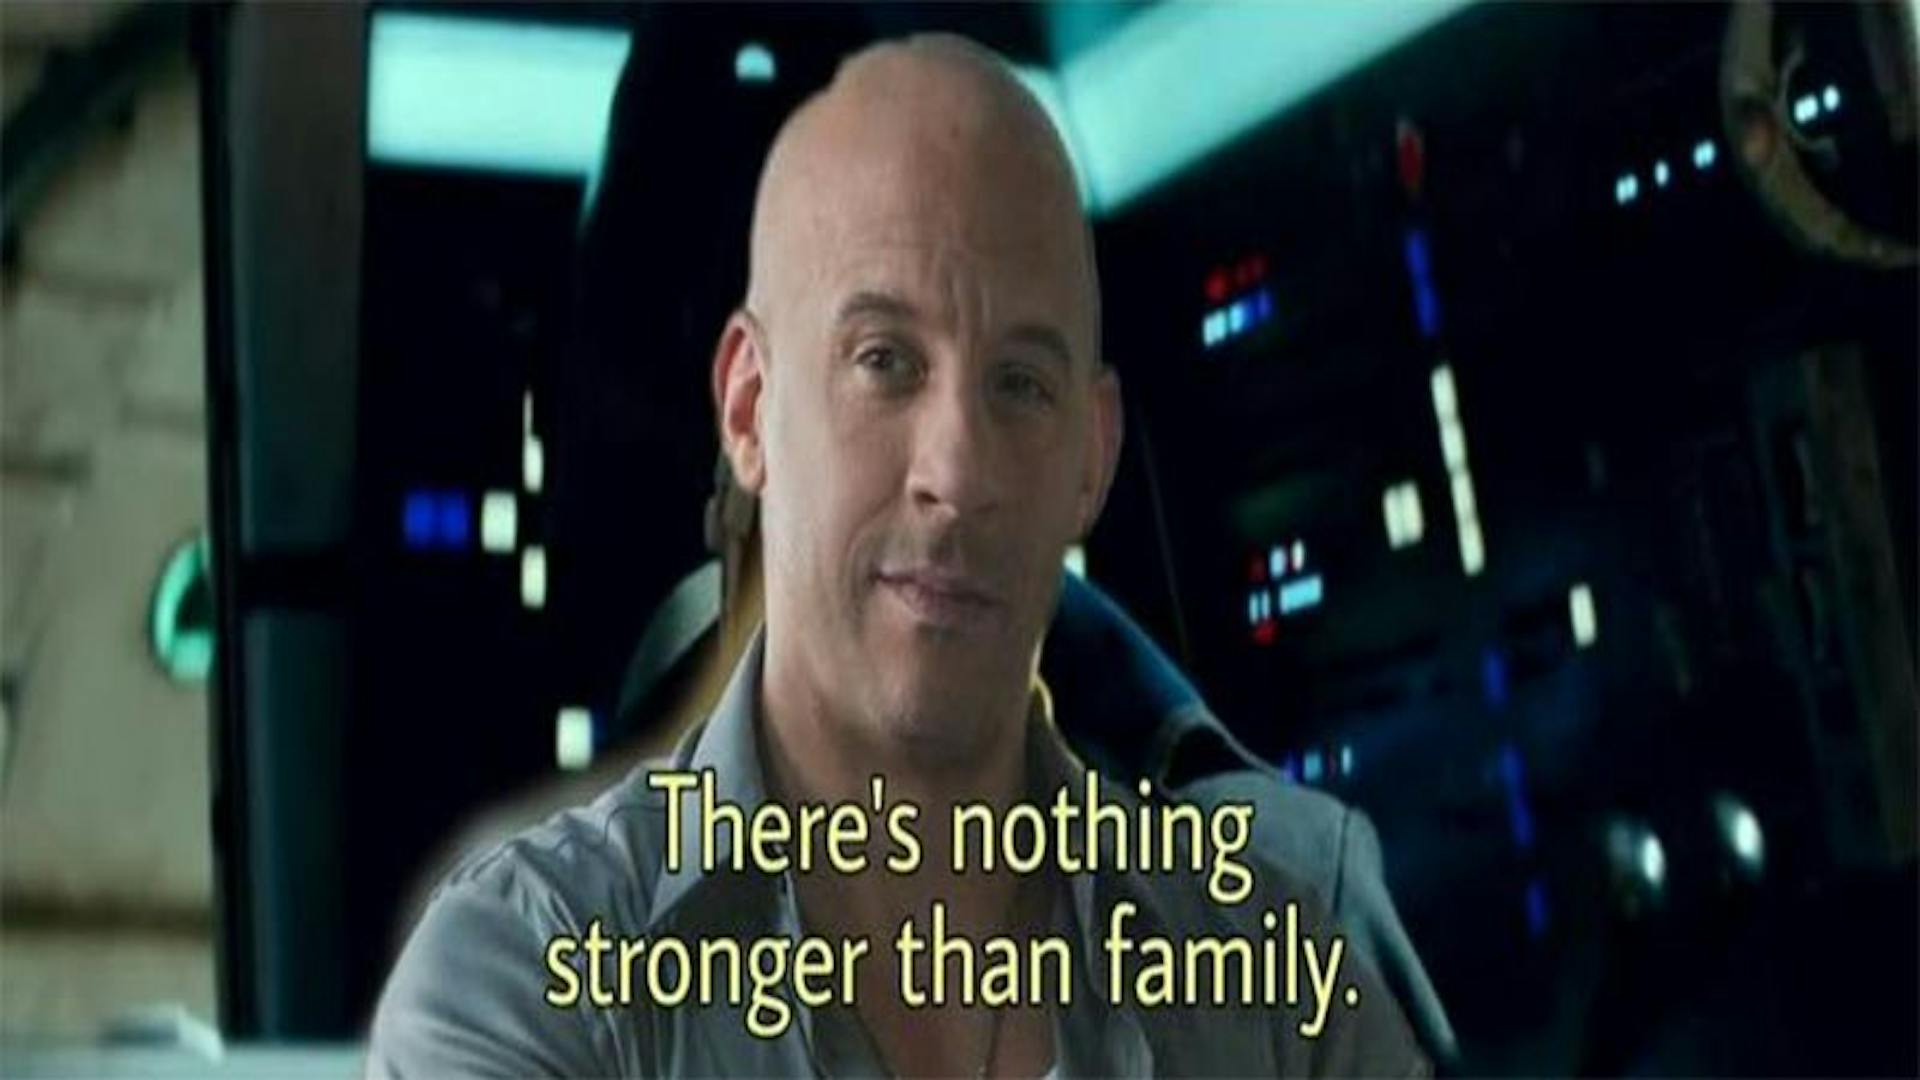 https://knowyourmeme.com/memes/nothing-stronger-than-family